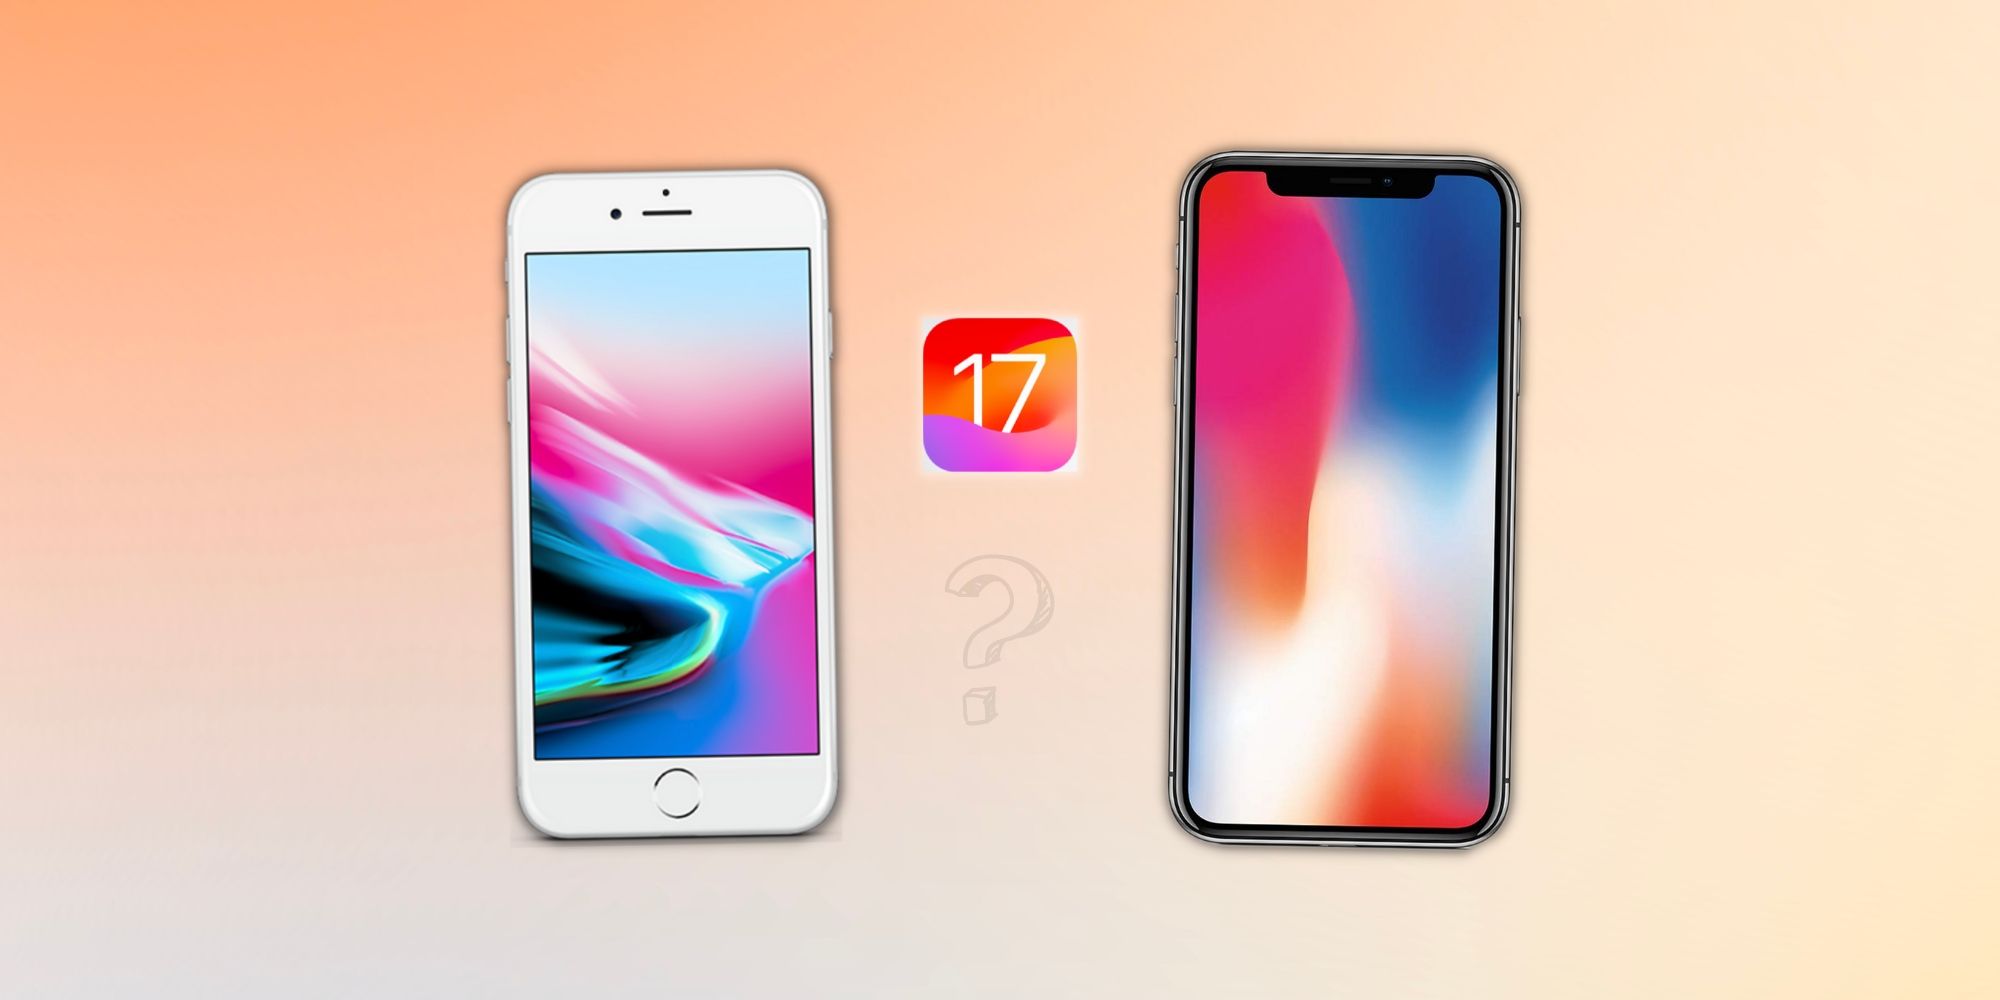 Will iPhone 8 and iPhone X get iOS 17